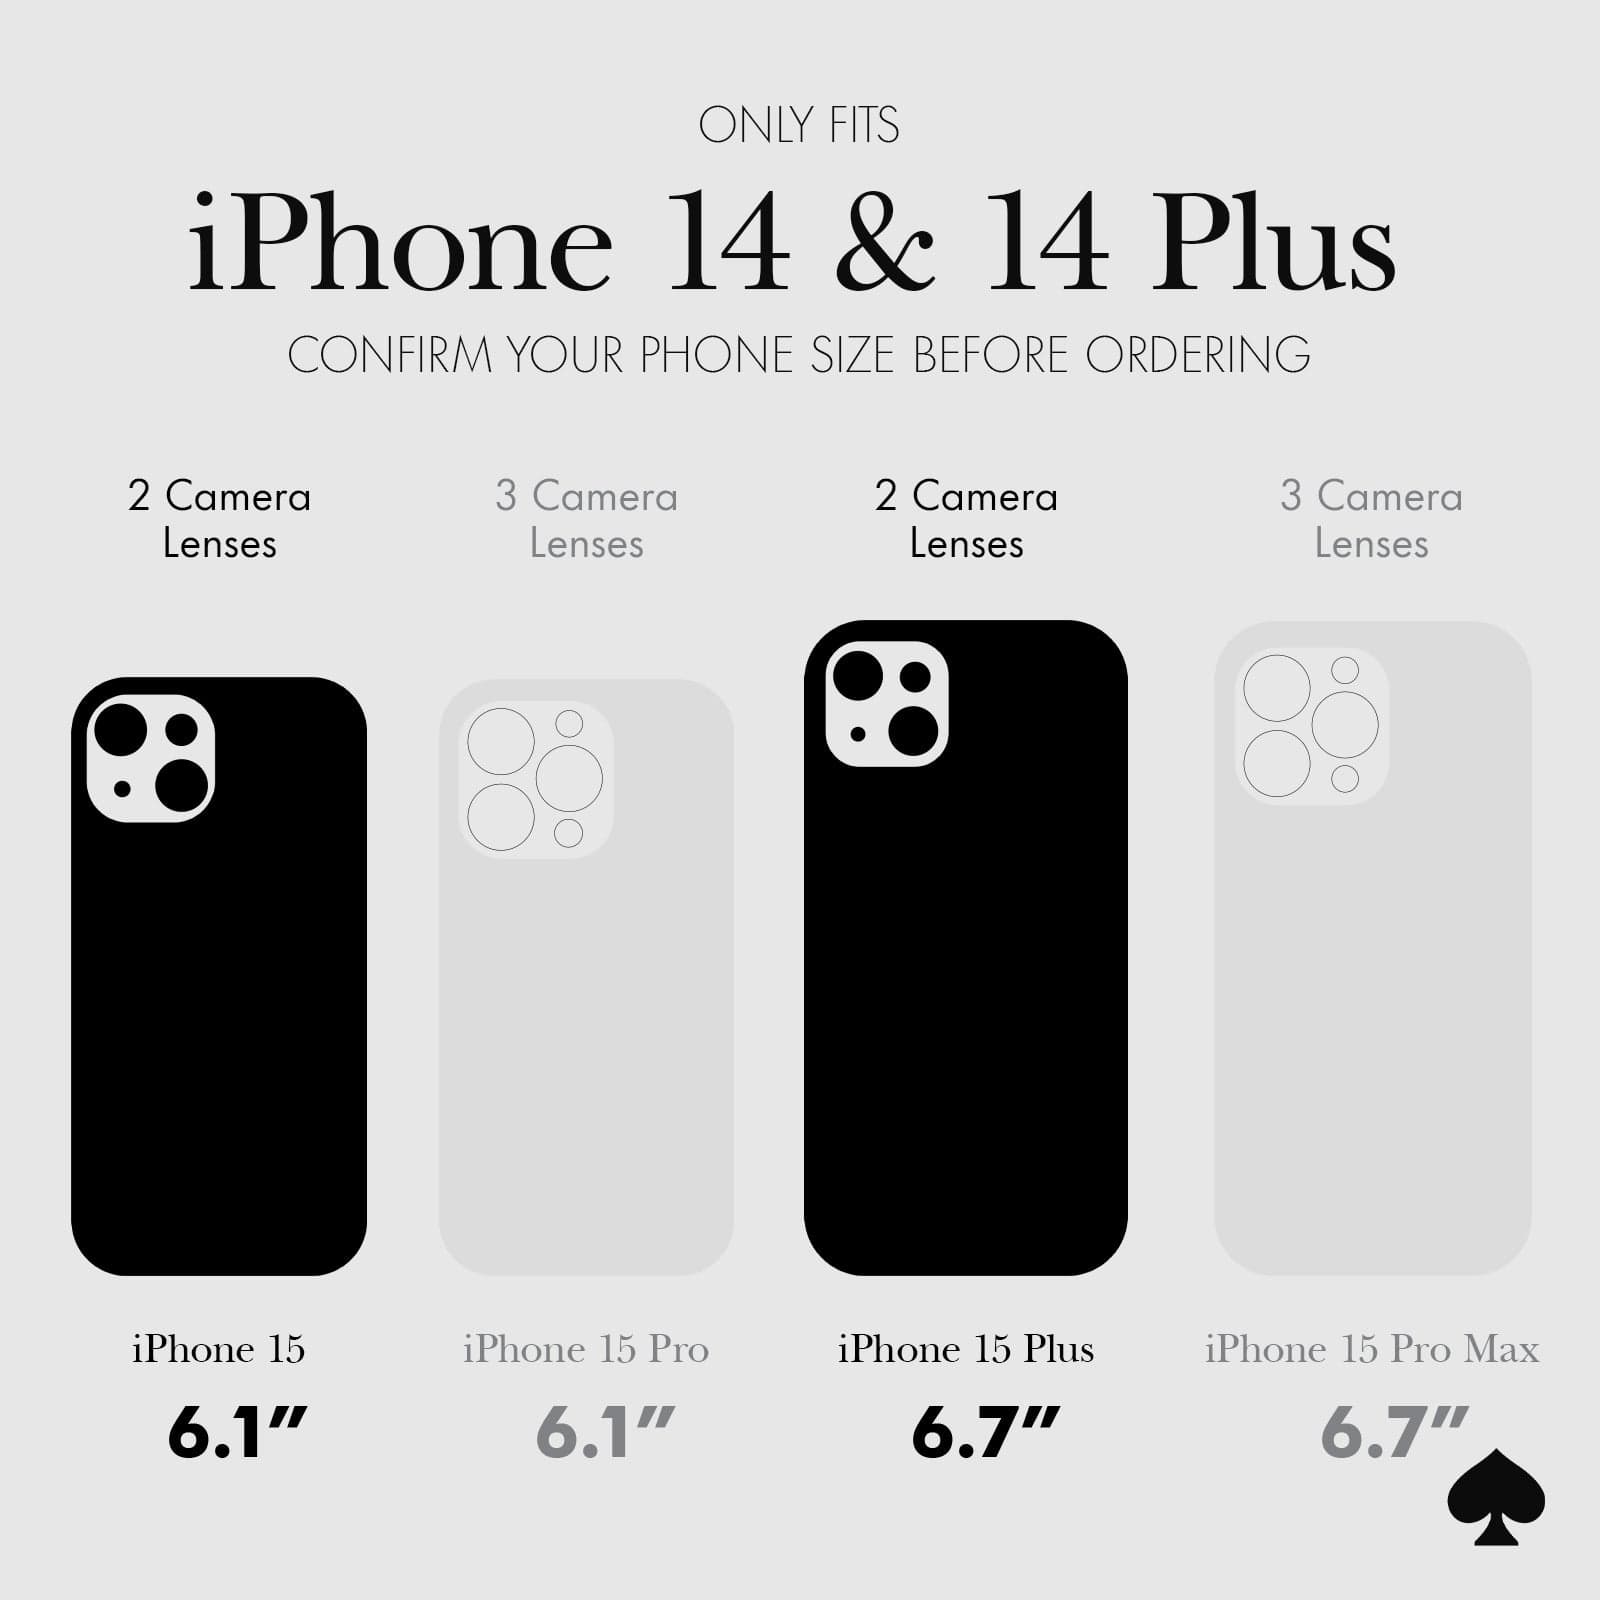 ONLY FITS IPHONE 14 AND 14 PLUS. CONFIRM YOUR PHONE SIZE BEFORE ORDERING